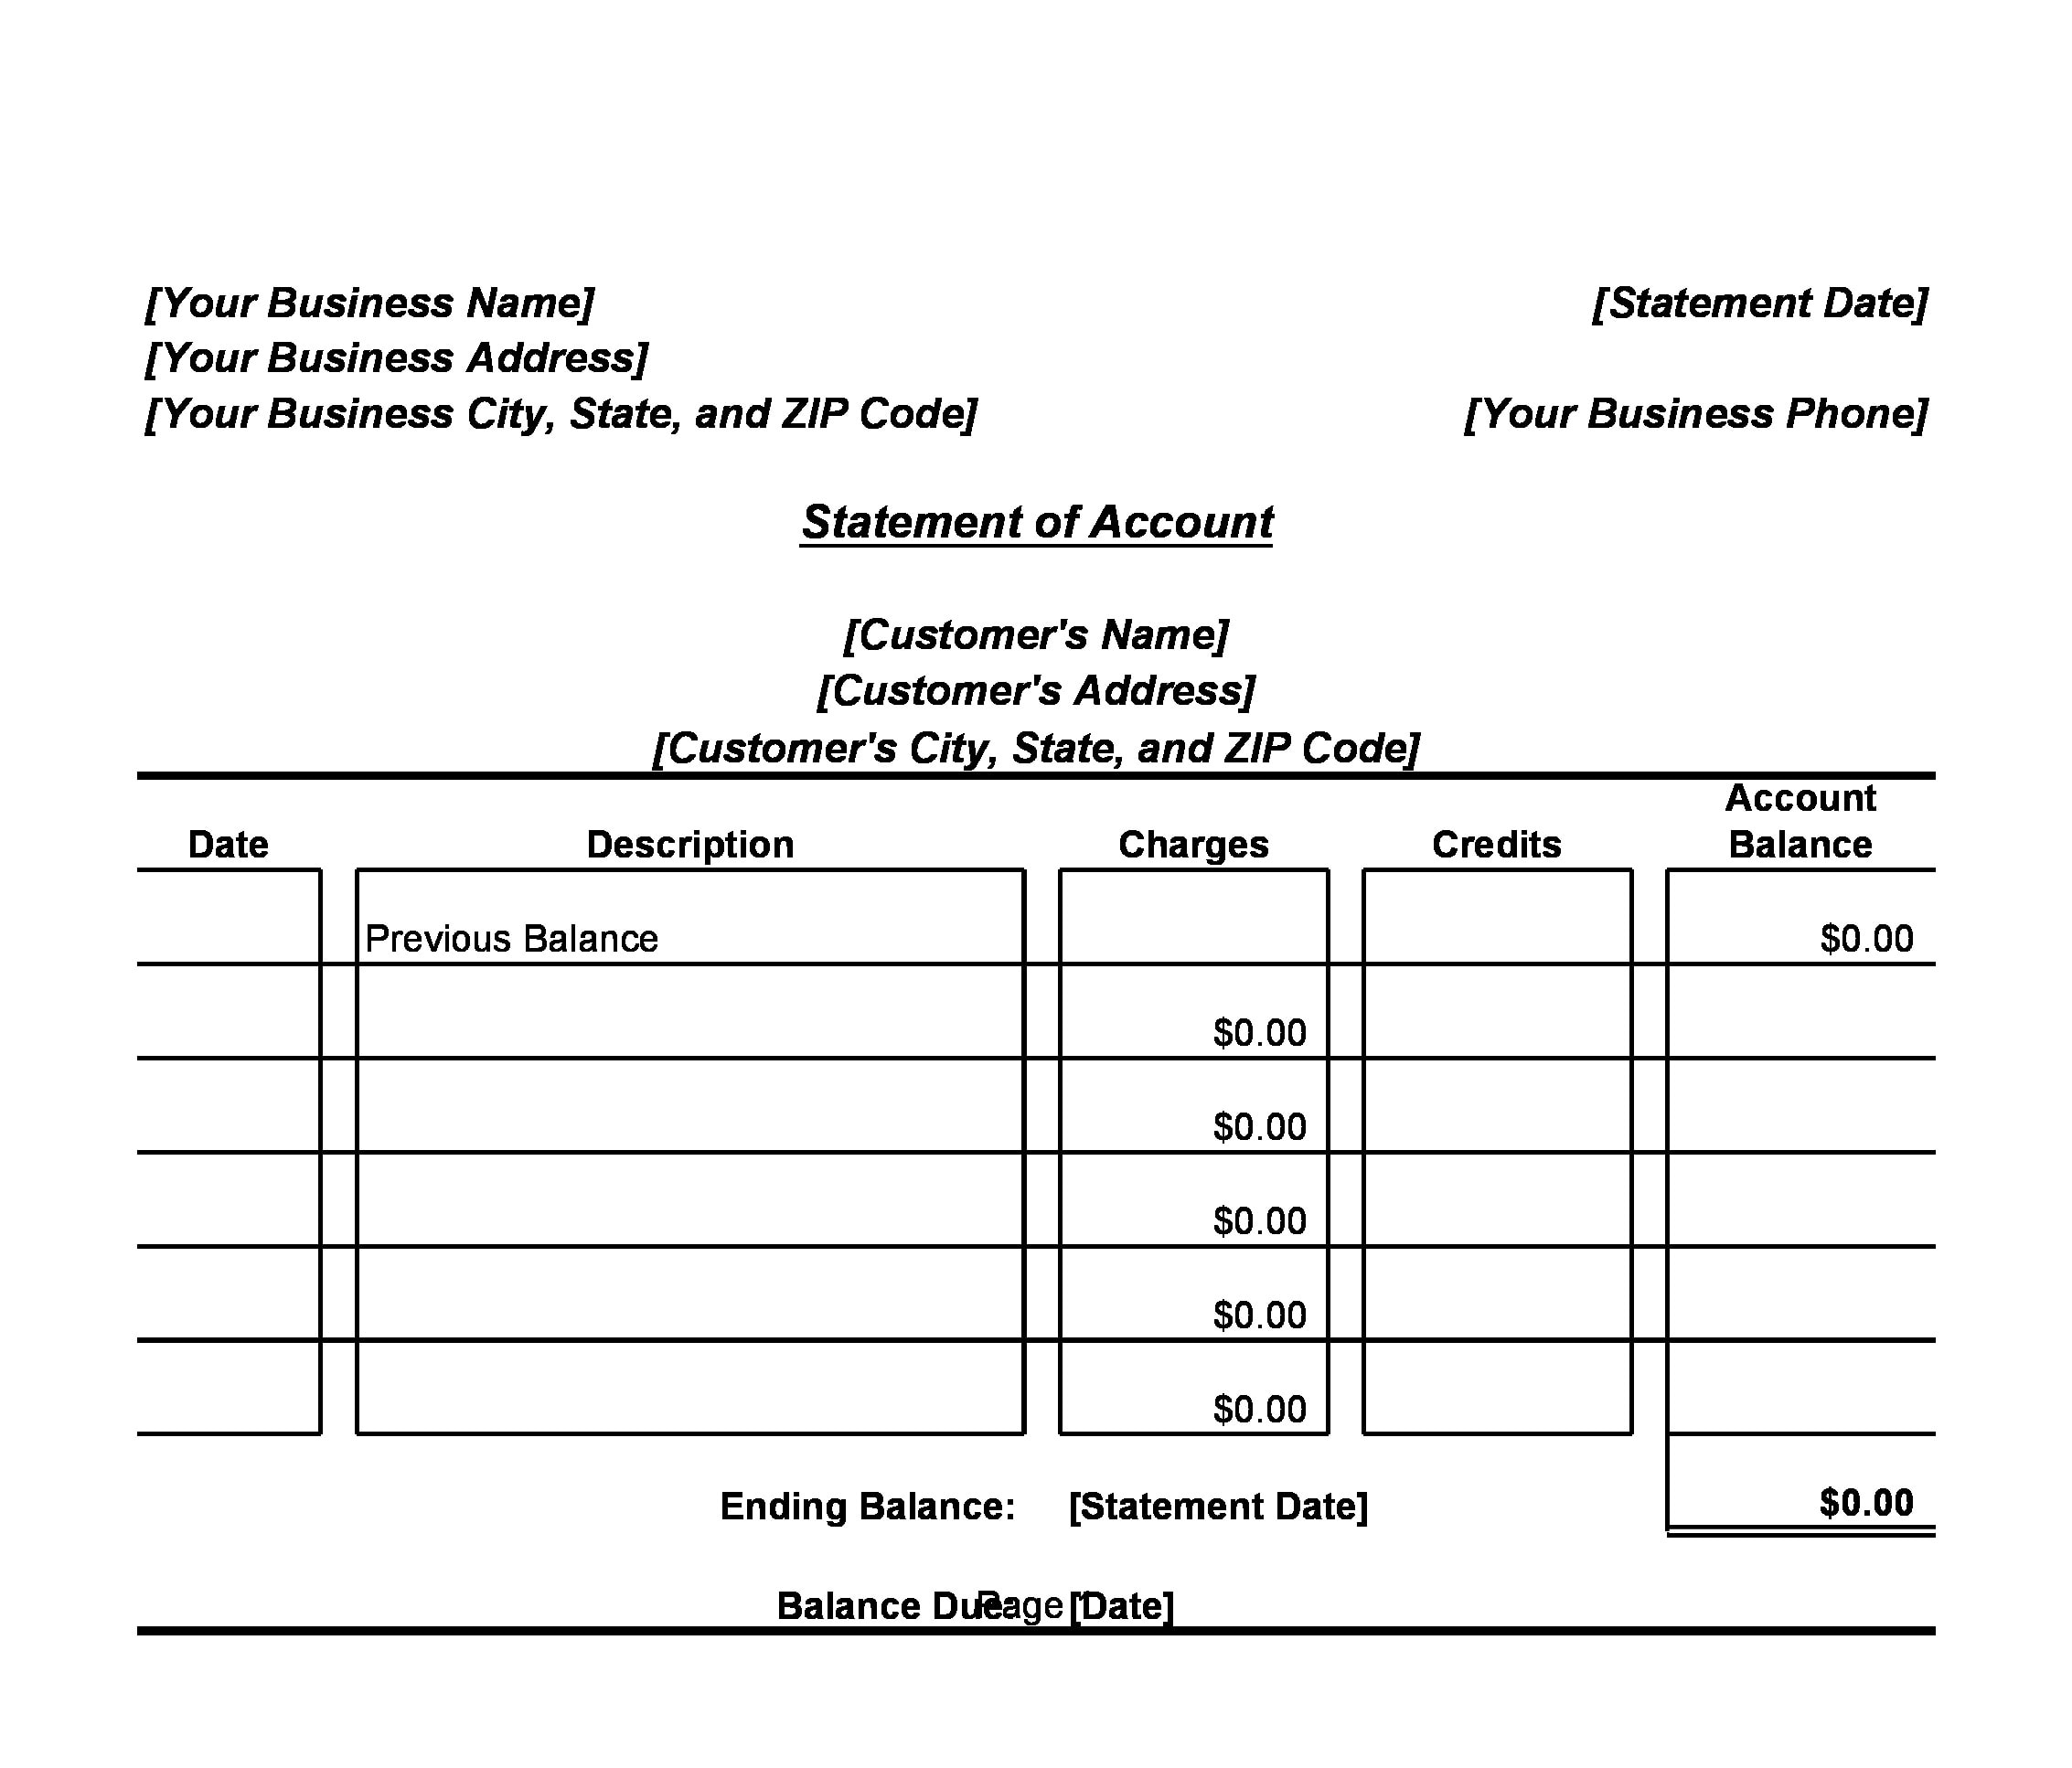 30 Account Statement Templates [Free] - TemplateArchive